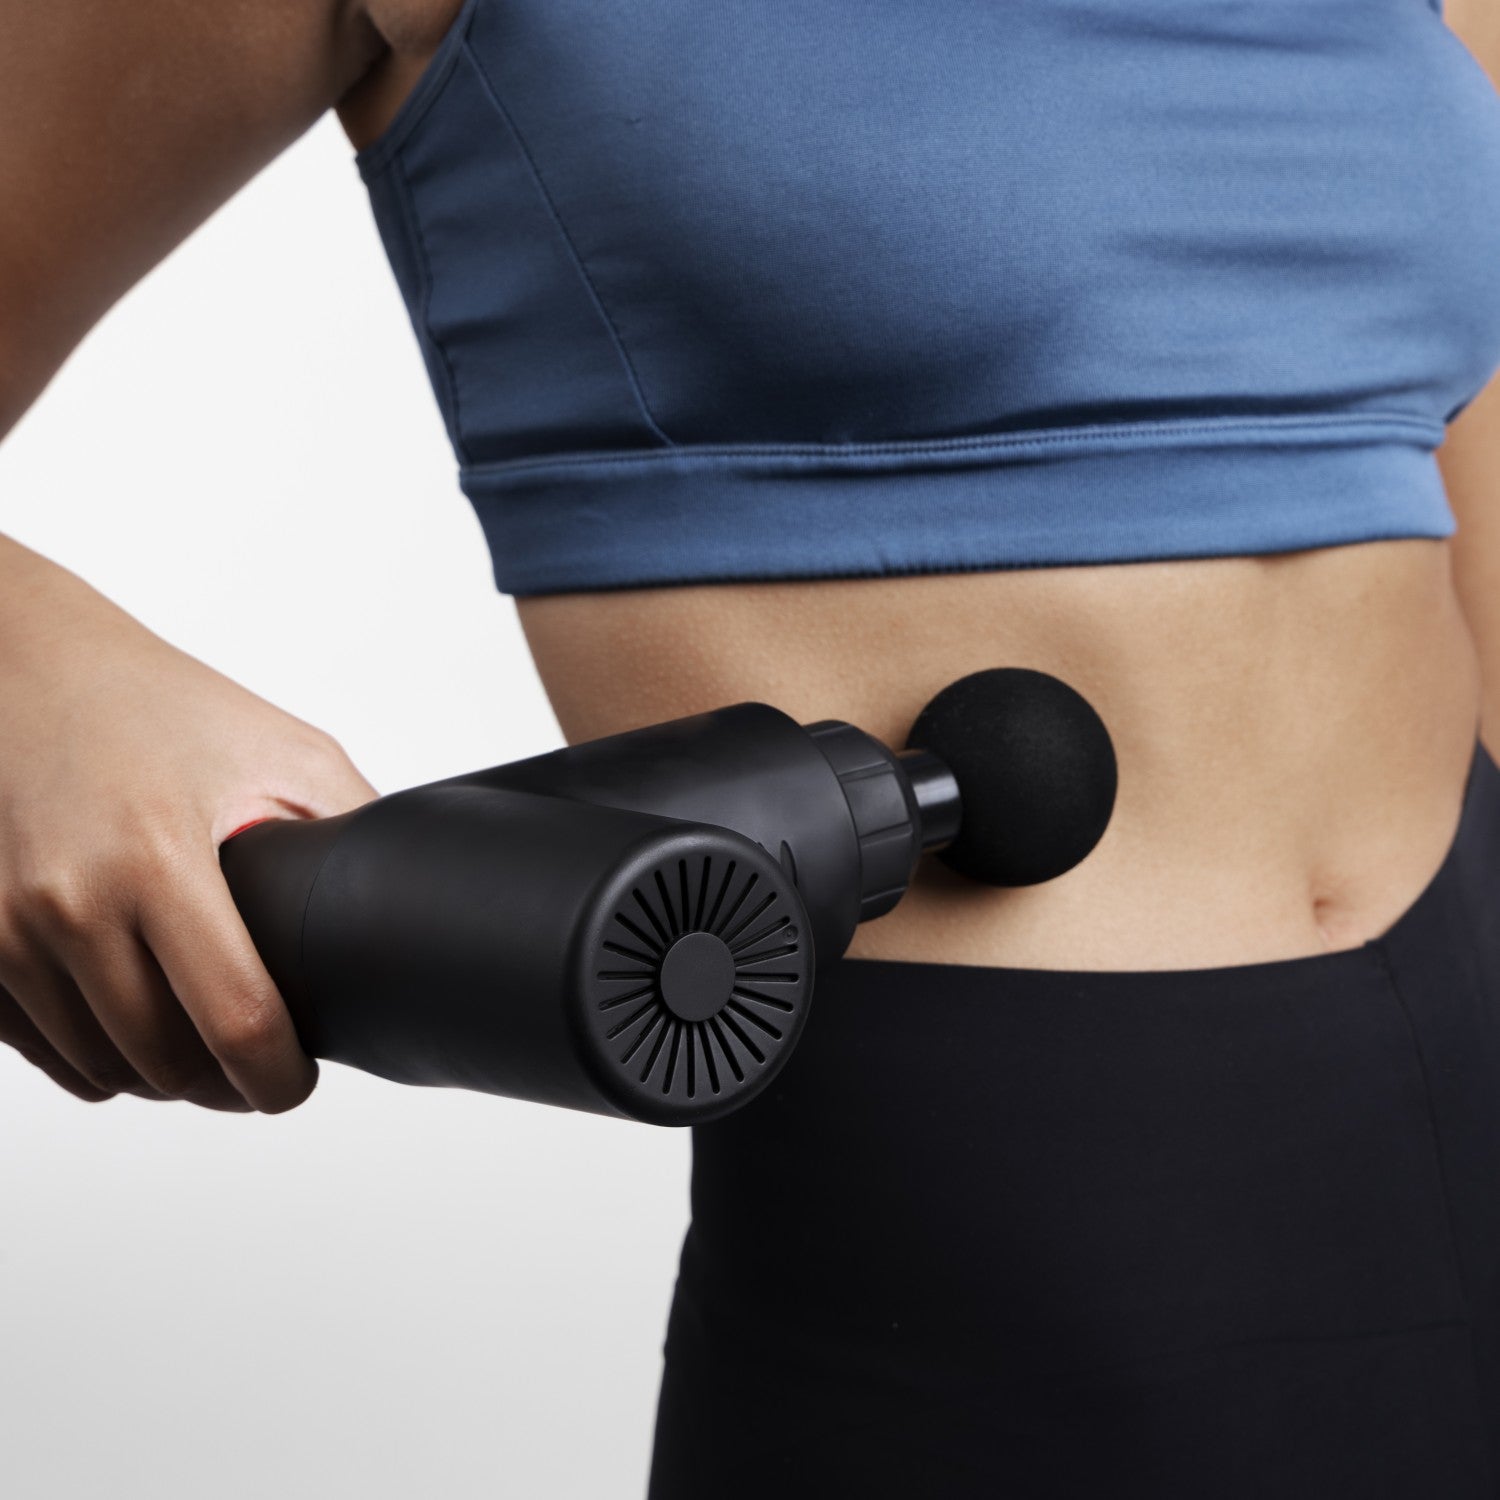 Using Massage Guns for Back Pain: Is It Safe and Effective?